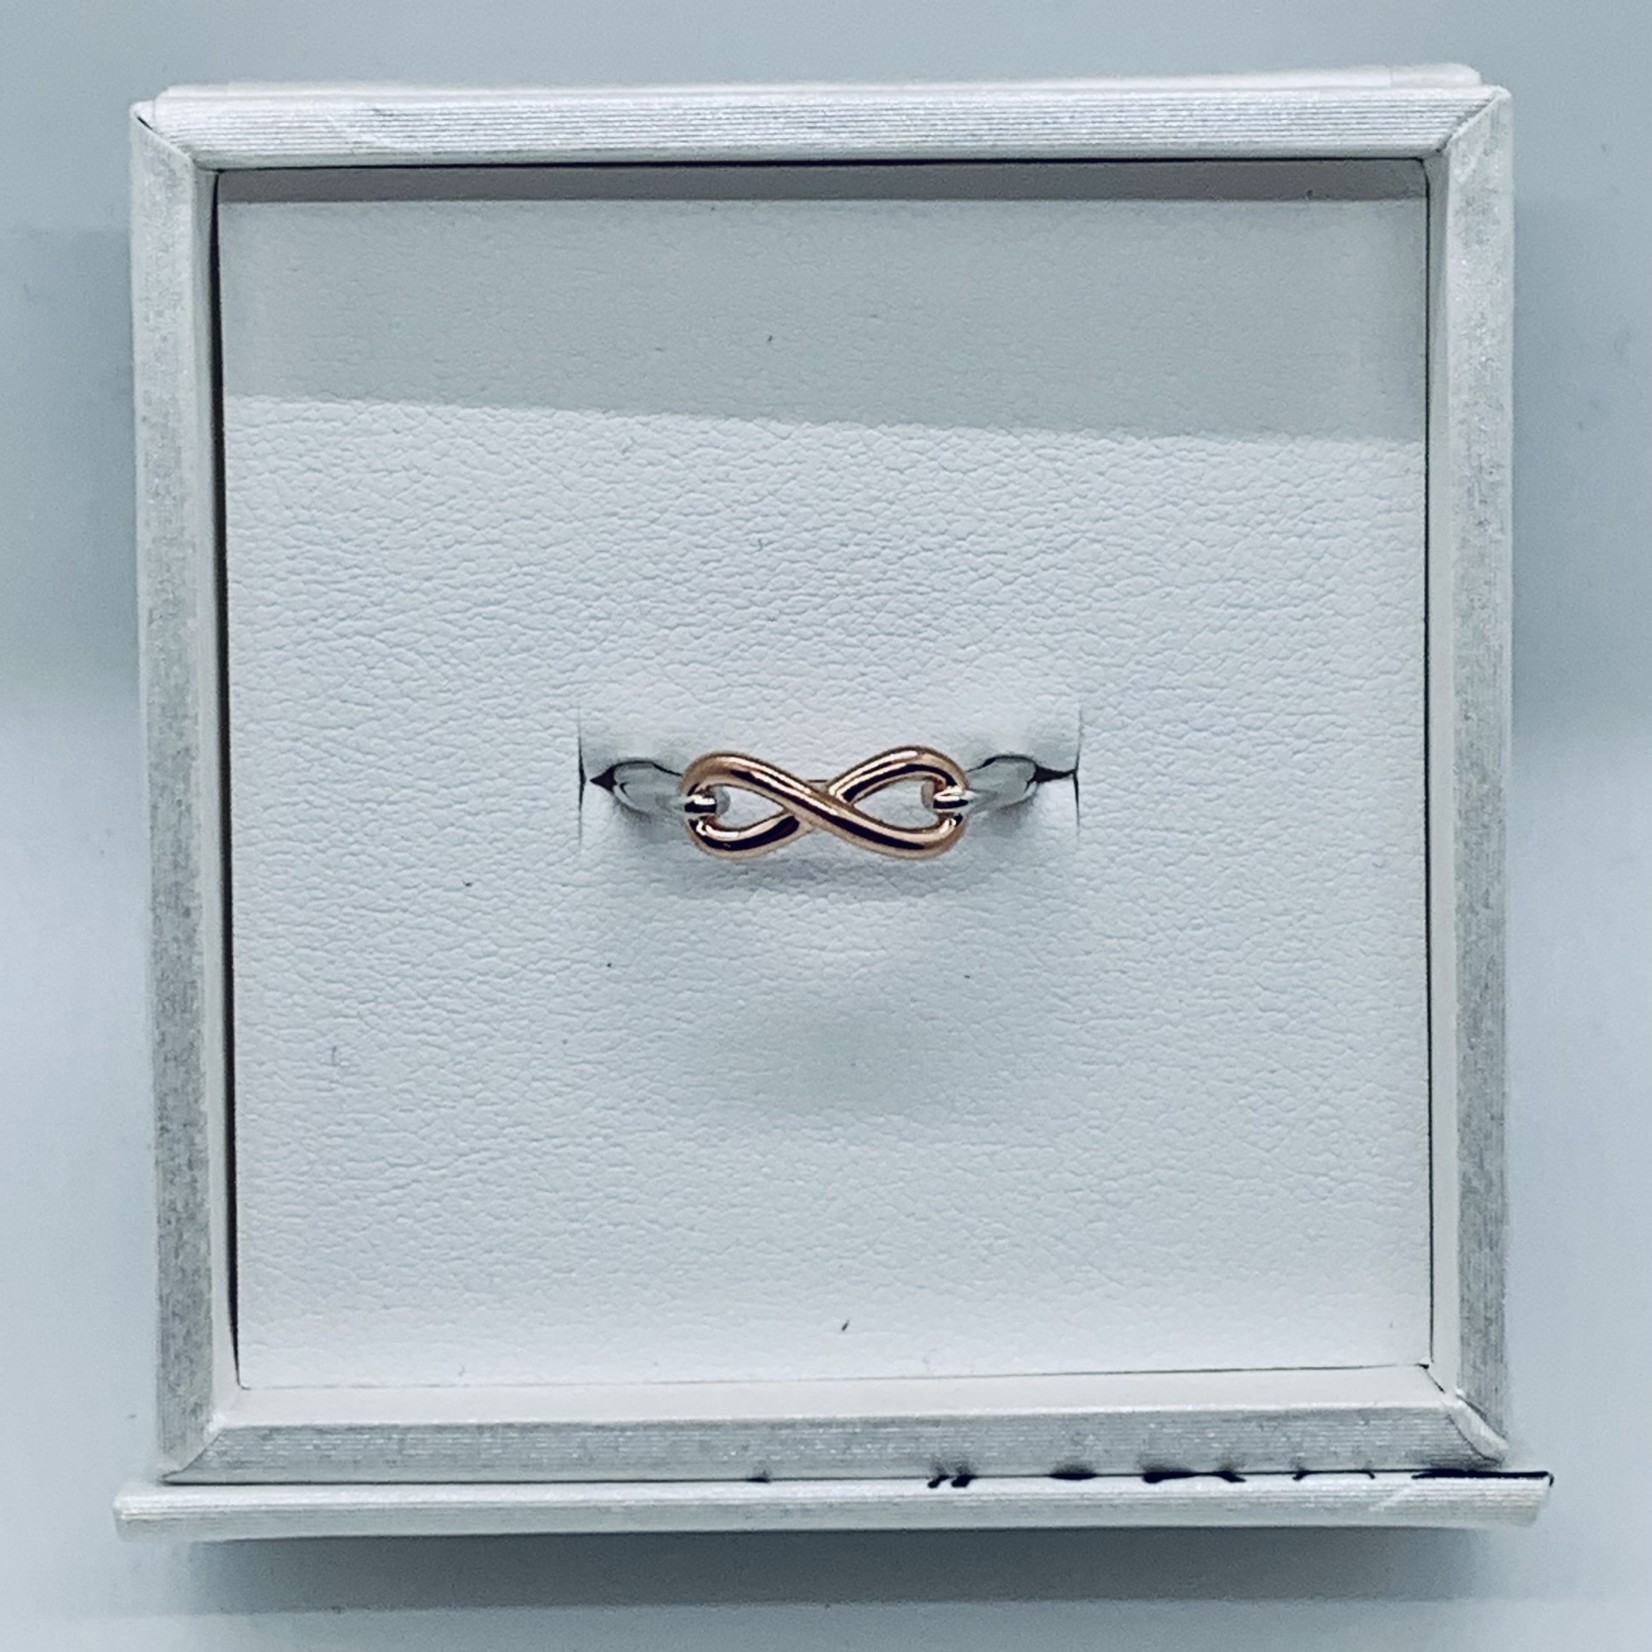 Legend Legend SS Infinity Ring Size 7